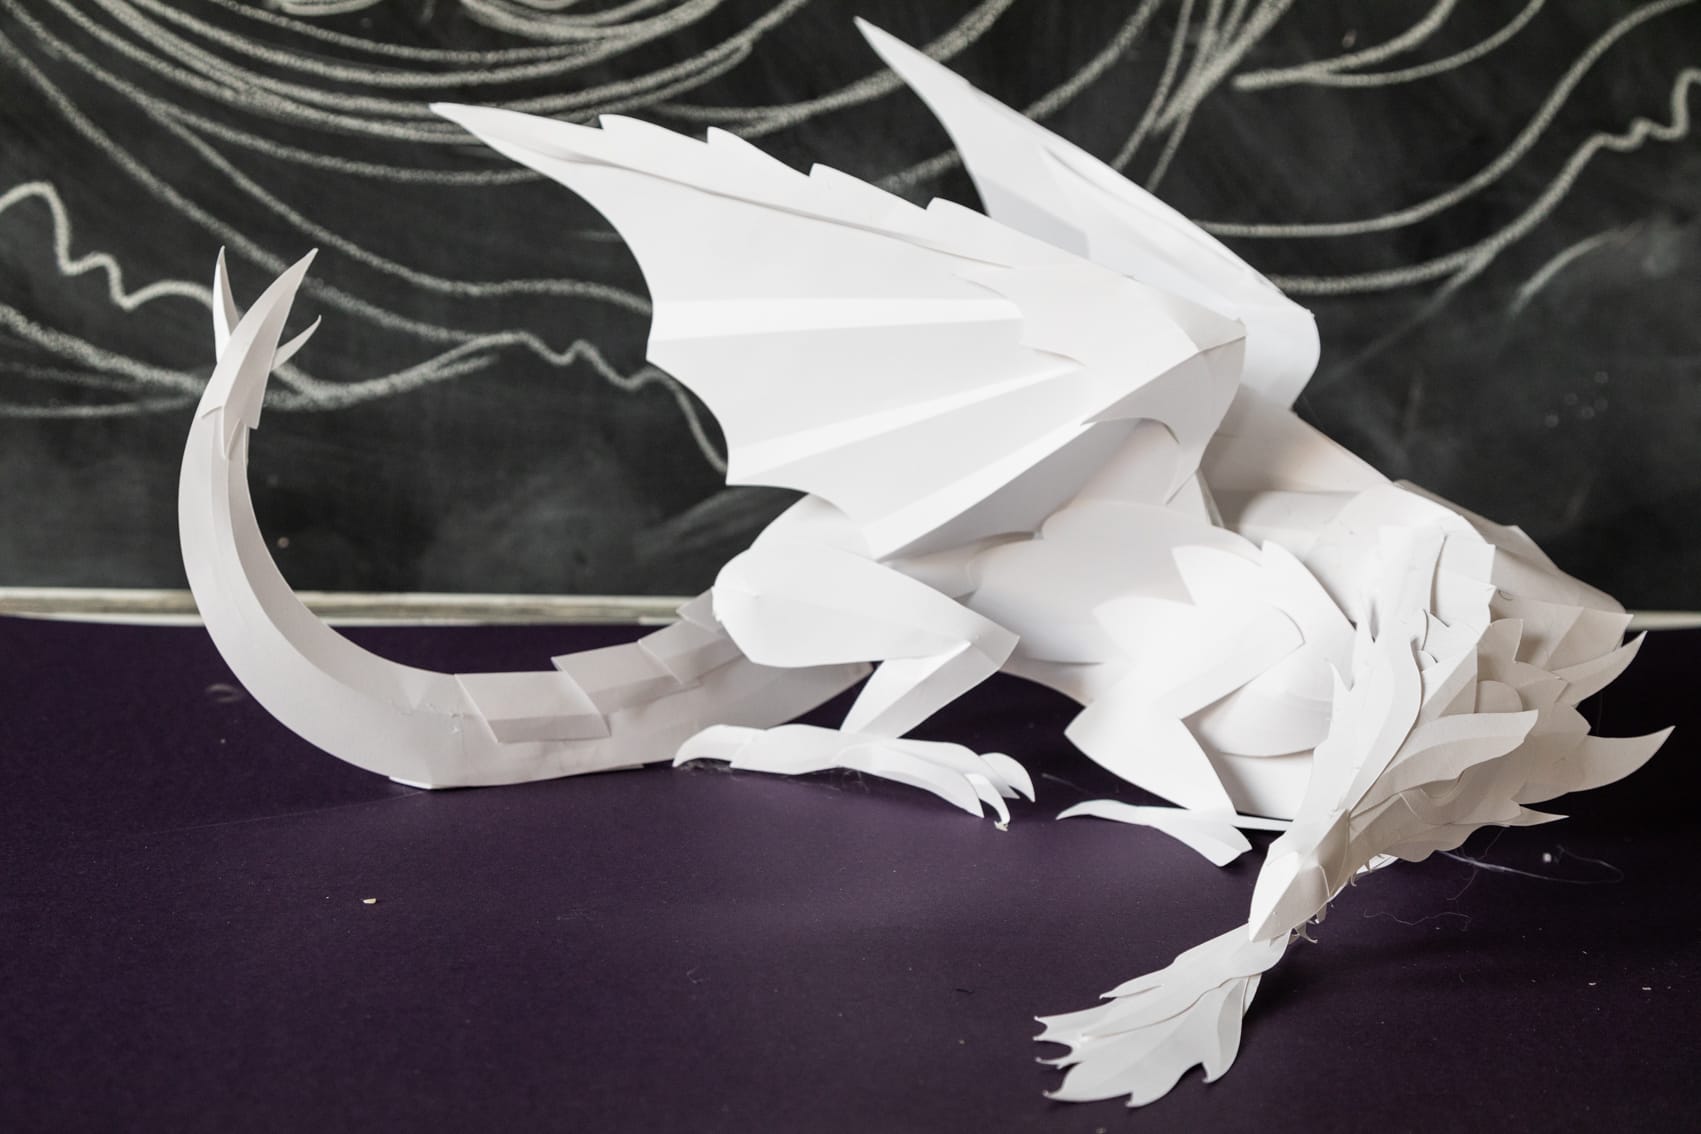 Making an office dragon